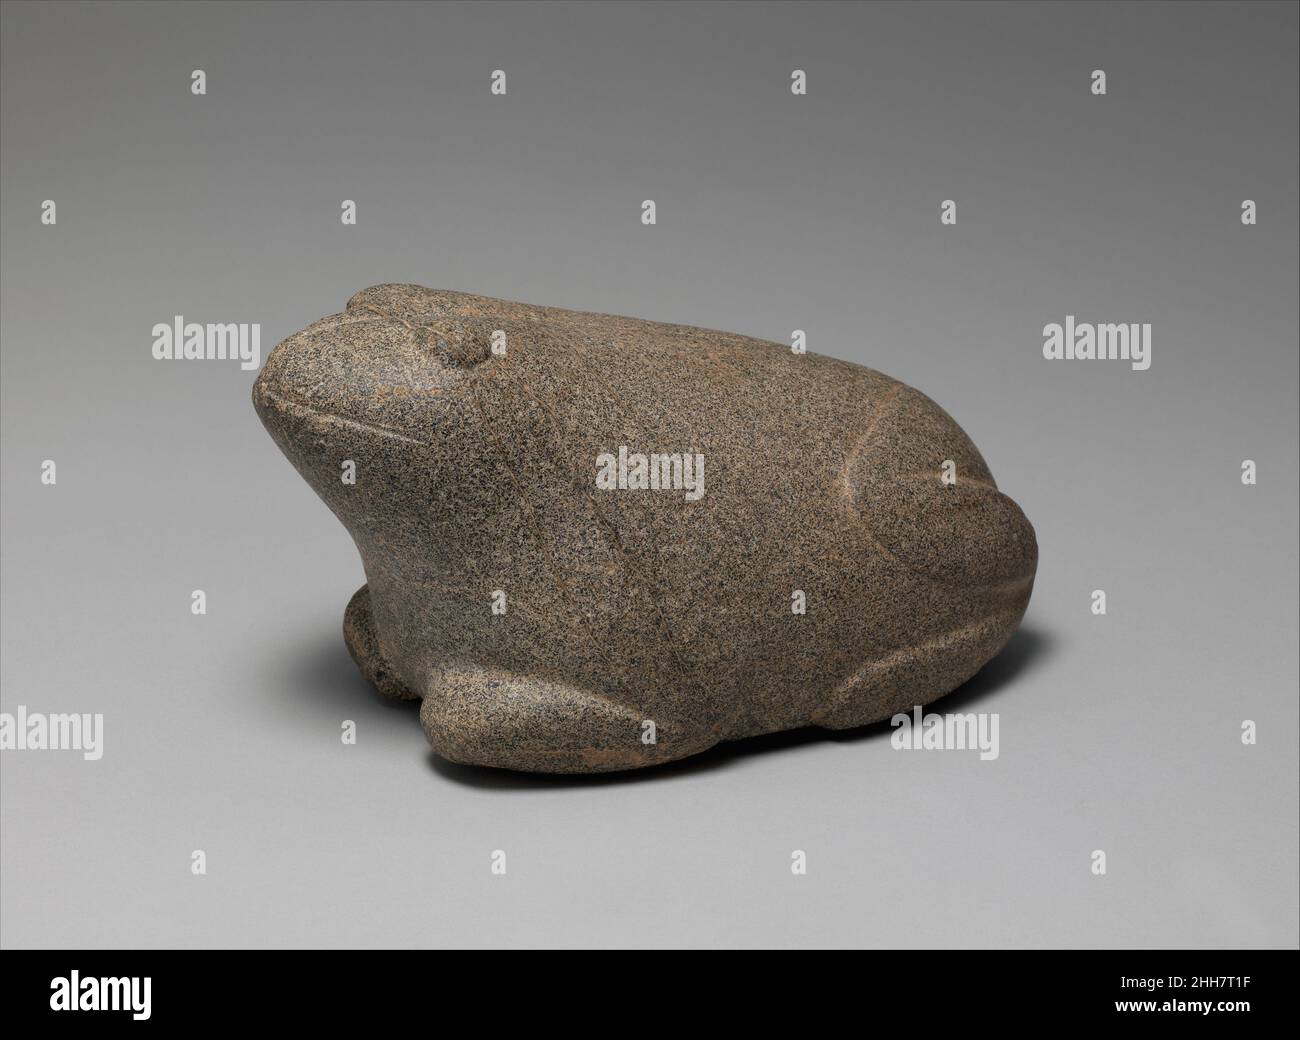 Weight in shape of frog ca. 2000–1600 B.C. Babylonian Zoomorphic weights were widespread in the ancient world. Weights in the shape of frogs and toads were rare in the Near East, but they do occur in Egypt. This frog weight is dated to the second millennium B.C. on the basis of the four line Akkadian inscription under its throat: 'a frog [weighing] 10 minas, a legitimate weight of the god Shamash, belonging to Iddin-Nergal, son of Arkat-ili-damqa.' The mina was the Mesopotamian unit of measure, weighing about 500 grams (18 ounces). The weight system was based on the talent or the average load Stock Photo